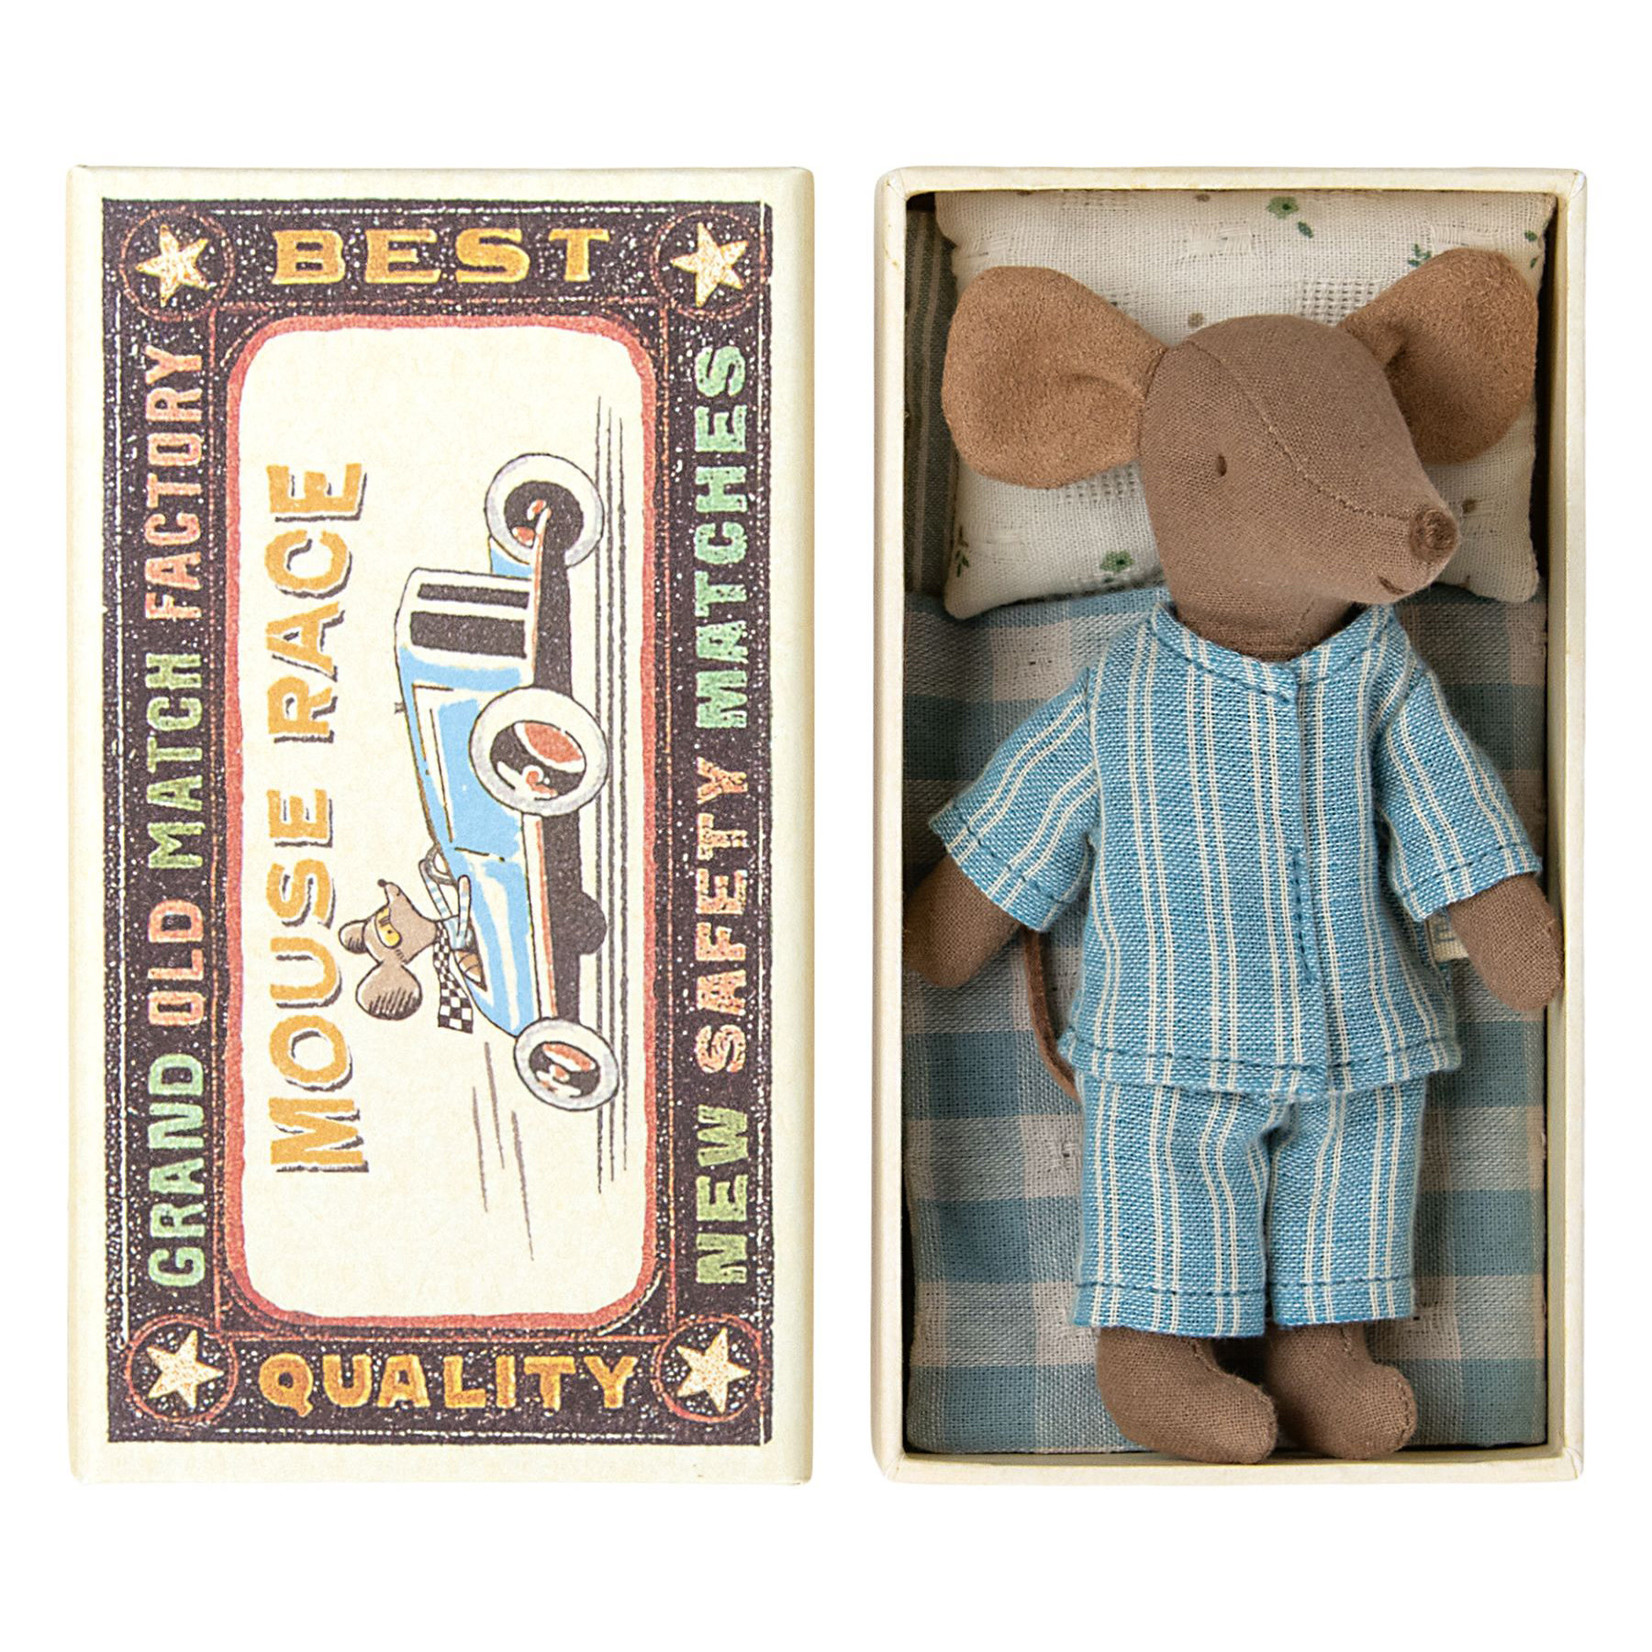 Maileg PRE ORDER Maileg Big brother mouse in matchbox - Brown Mouse with pjs - Estimated arrival mid/end March